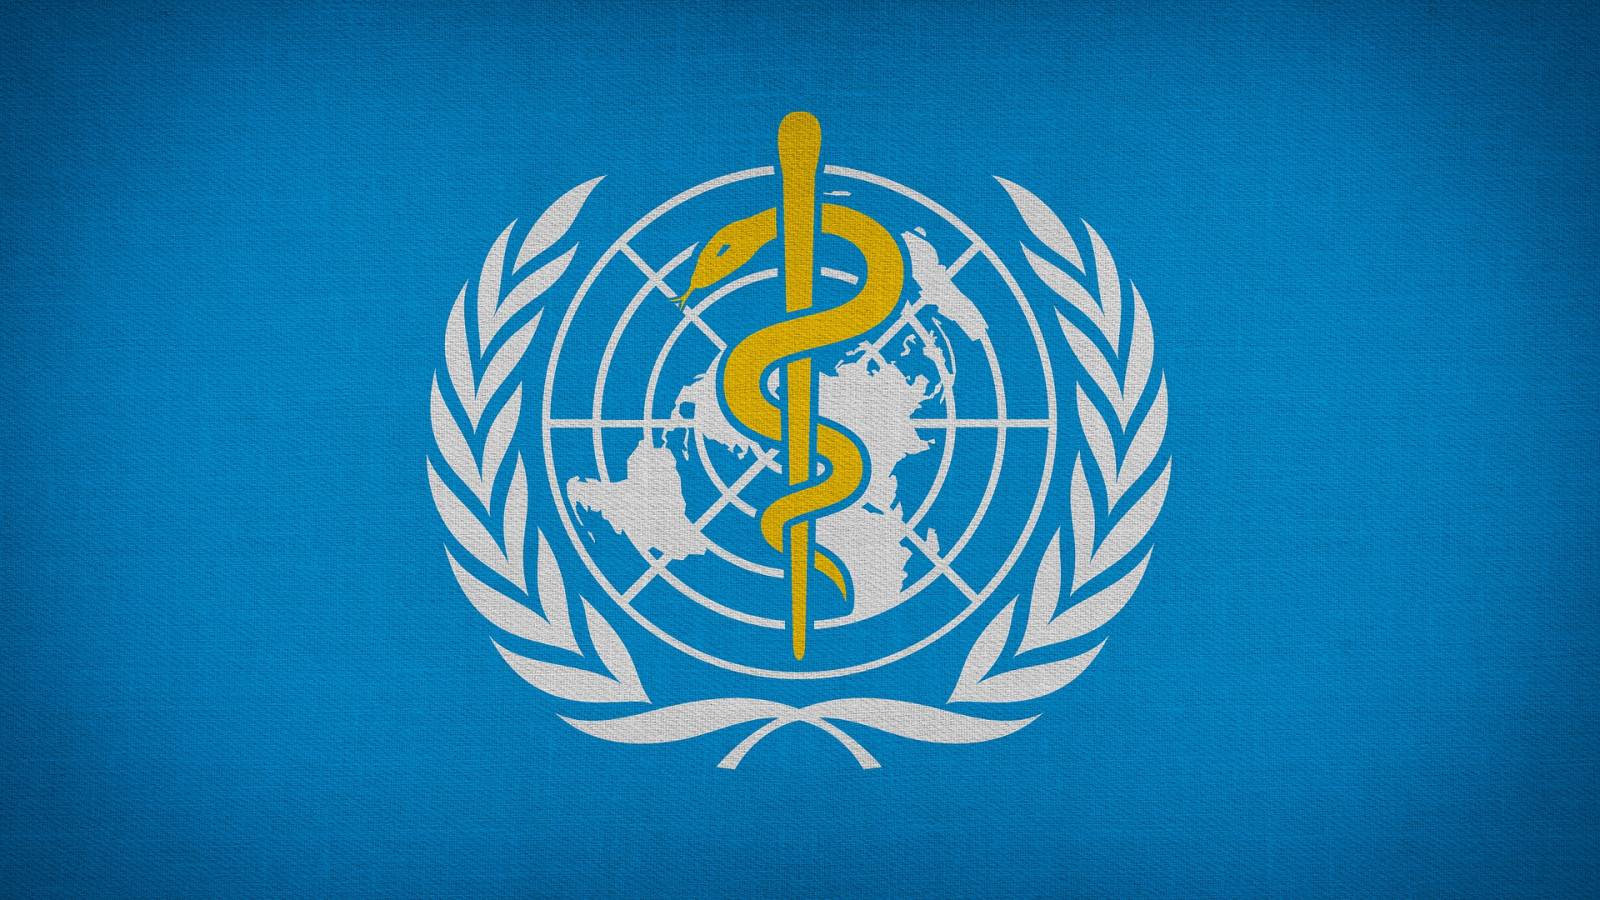 The actions required by the WHO to solve the worrying global problem of access to medical services